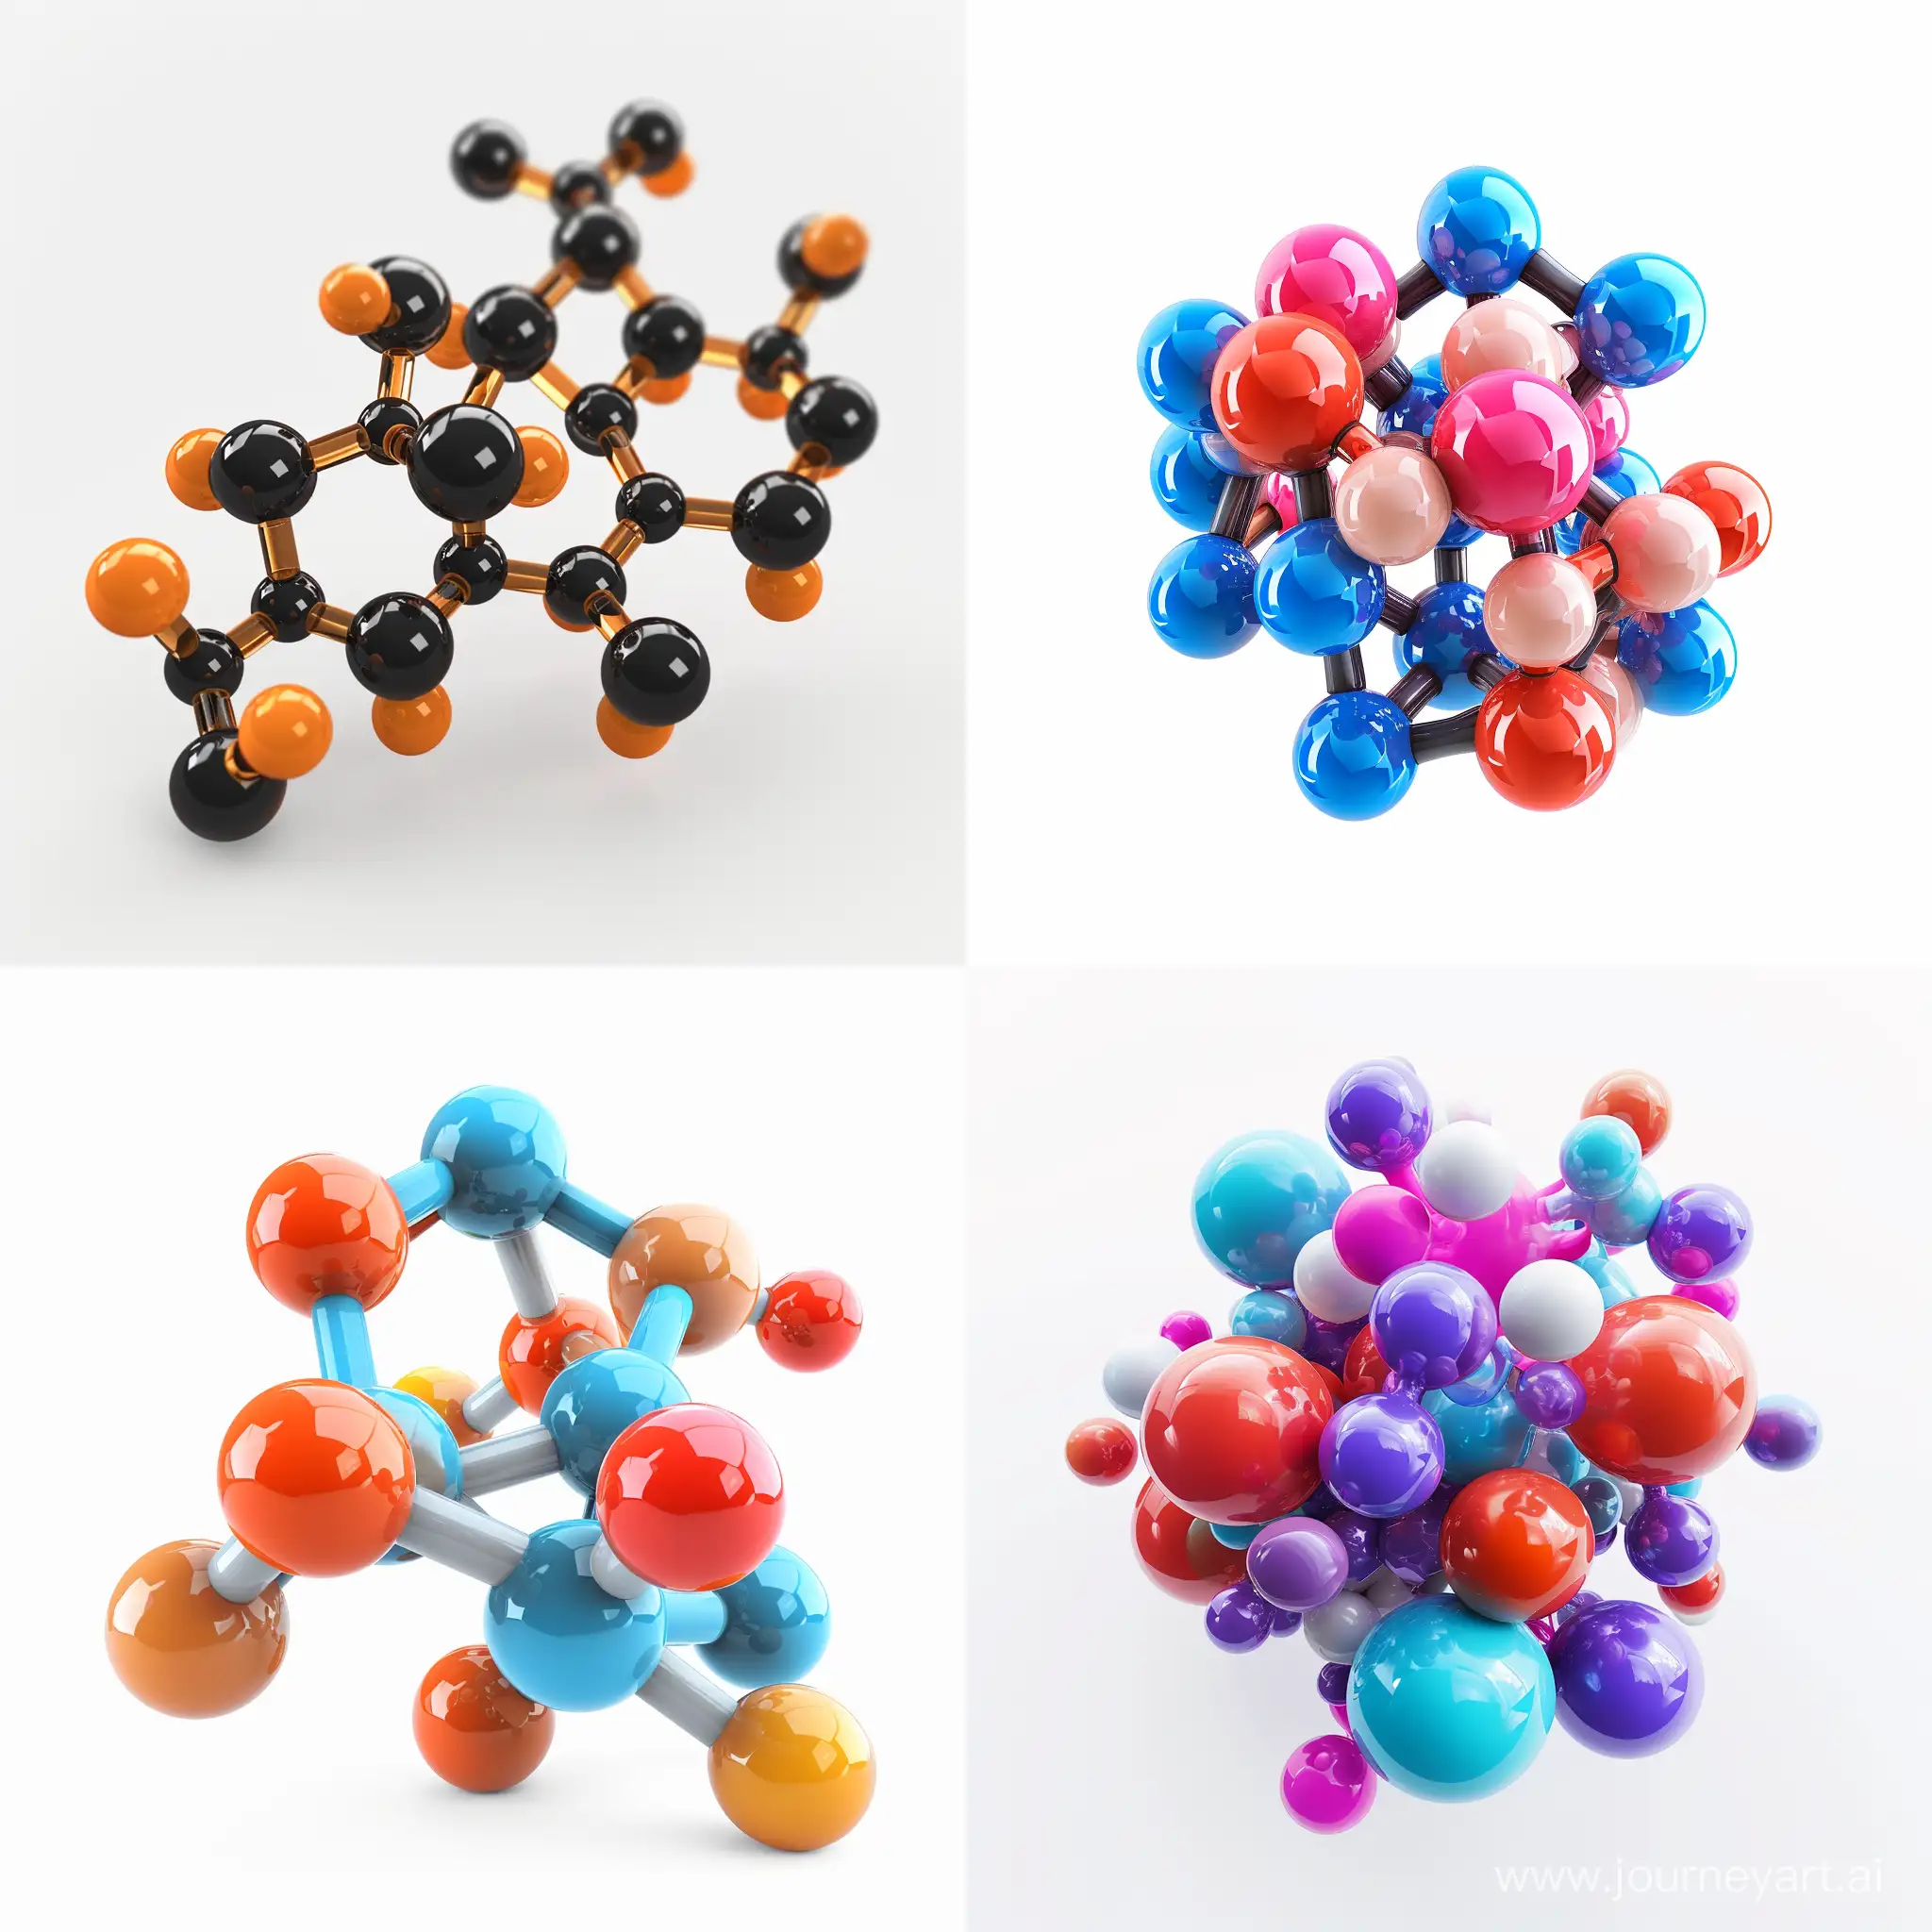 Act as a 3D graphics artist specializing in organic round shapes 3D icon visualization on white background. Your task is to describe the potential artistic representation of a synthetic rubber made by applying the solution polymerization method on butadiene, with a higher proportion of cis isomers. Create a vivid and detailed visual concept of how this rubber could be visually portrayed in a 3D abstract form, considering its molecular structure, texture, and potential applications. Additionally, discuss the potential visual appeal and significance of such a representation, considering its synthetic nature and unique chemical composition.